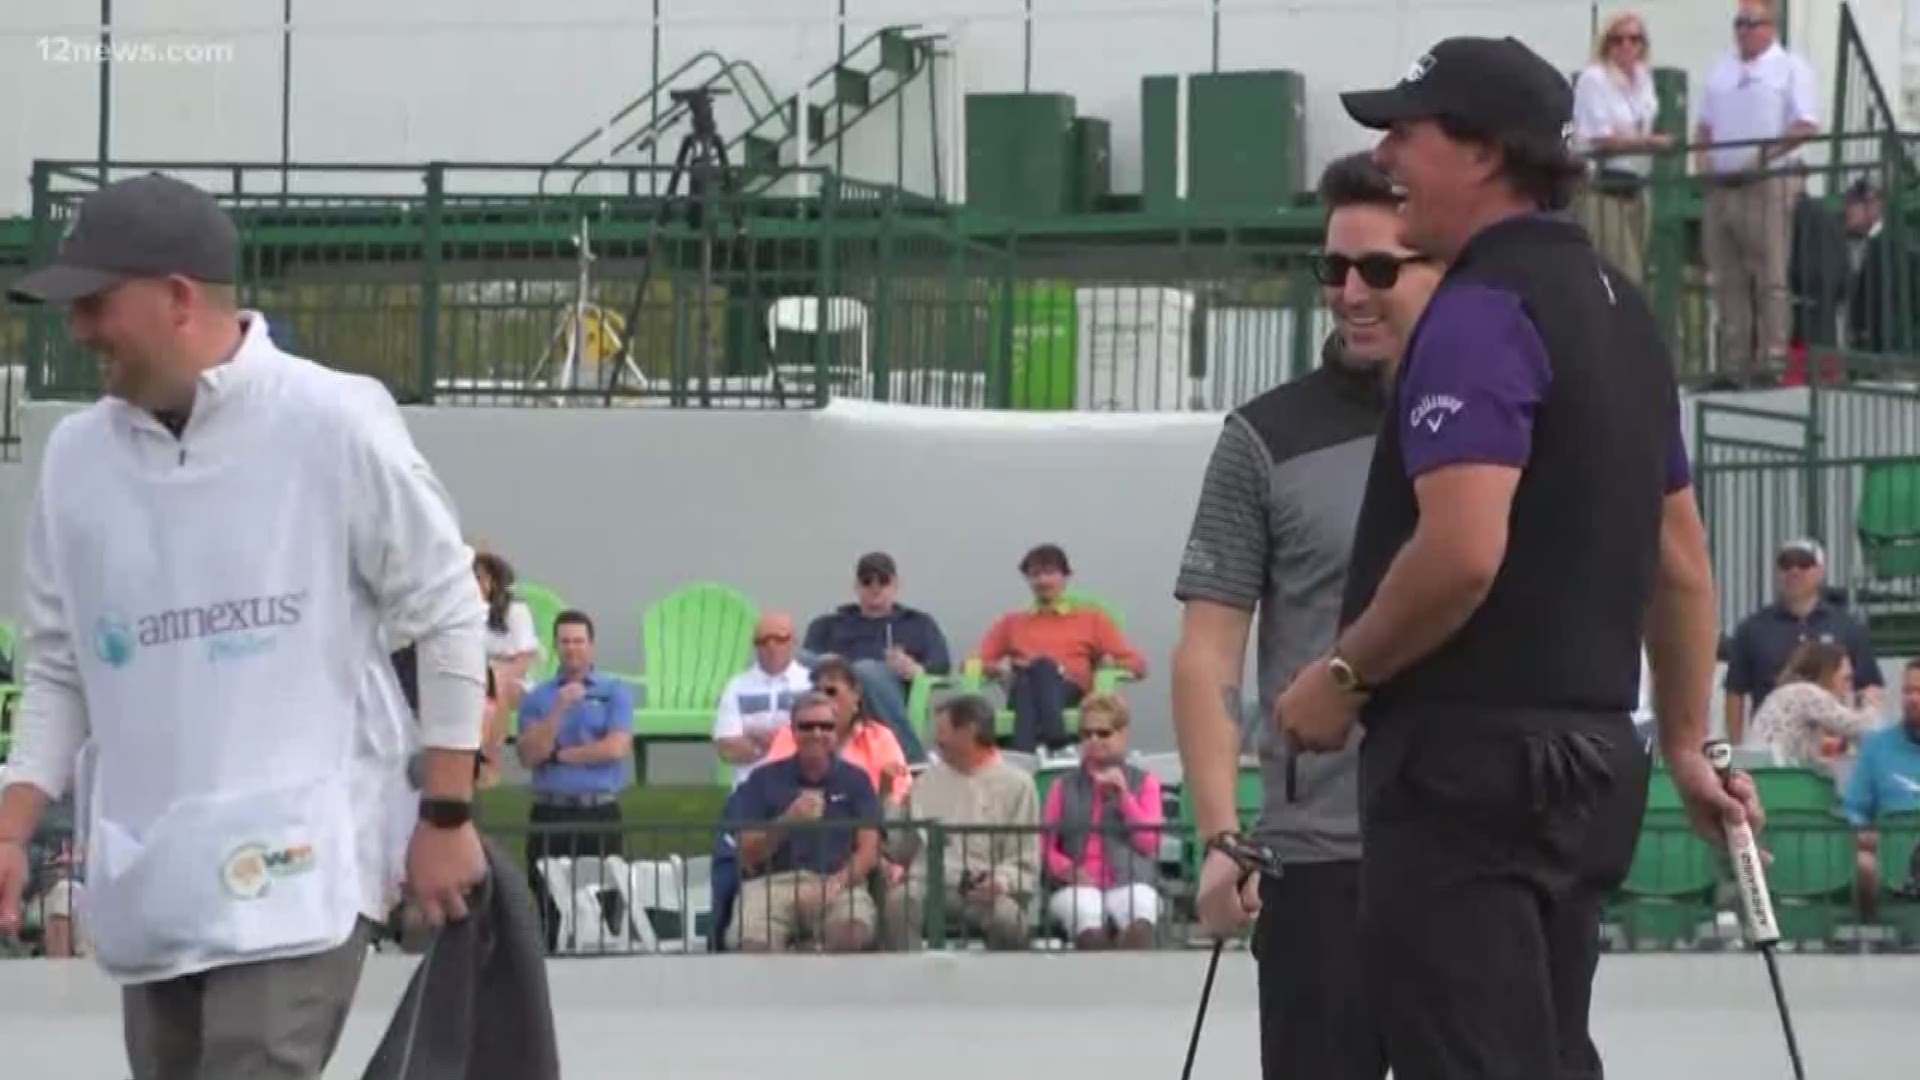 Phil Mickelson may be a rock star on the green, but in today's Pro-am, he played with an actual rock star. Well, country star. Jack Owen paired up with Phil to hit the links at the Waste Management Phoenix Open.